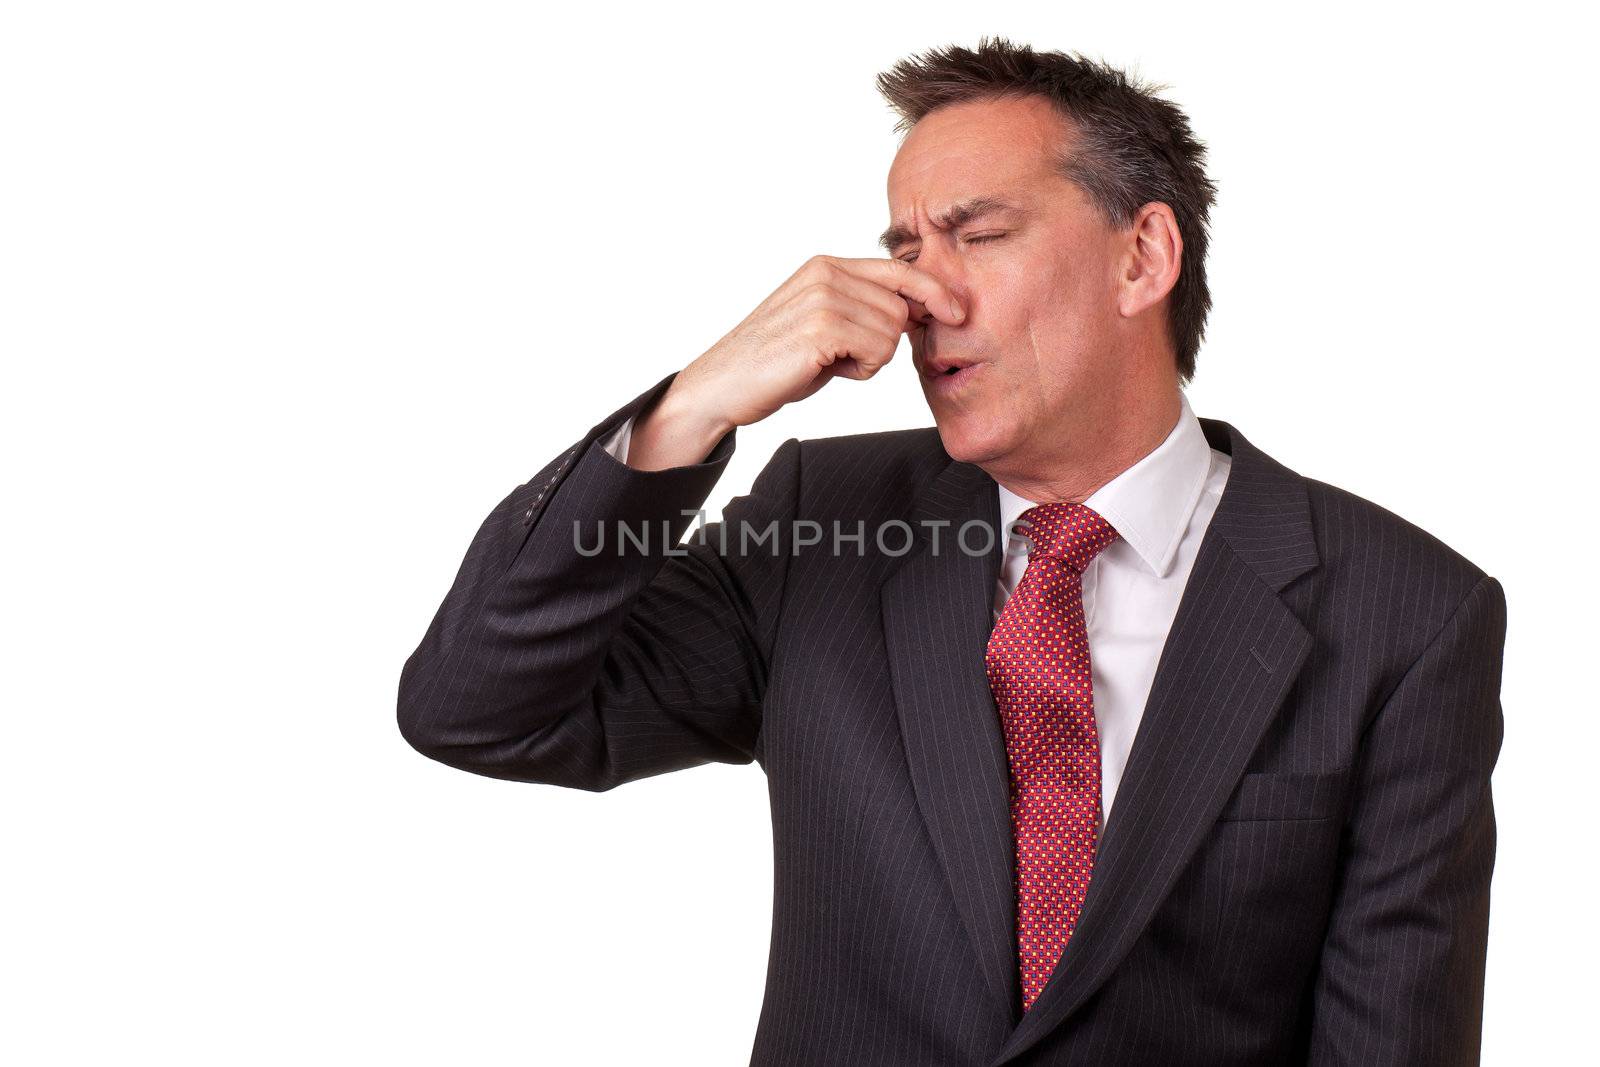 Middle Age Business Man in Suit Smelling Something Bad and Holding Nose Isolated